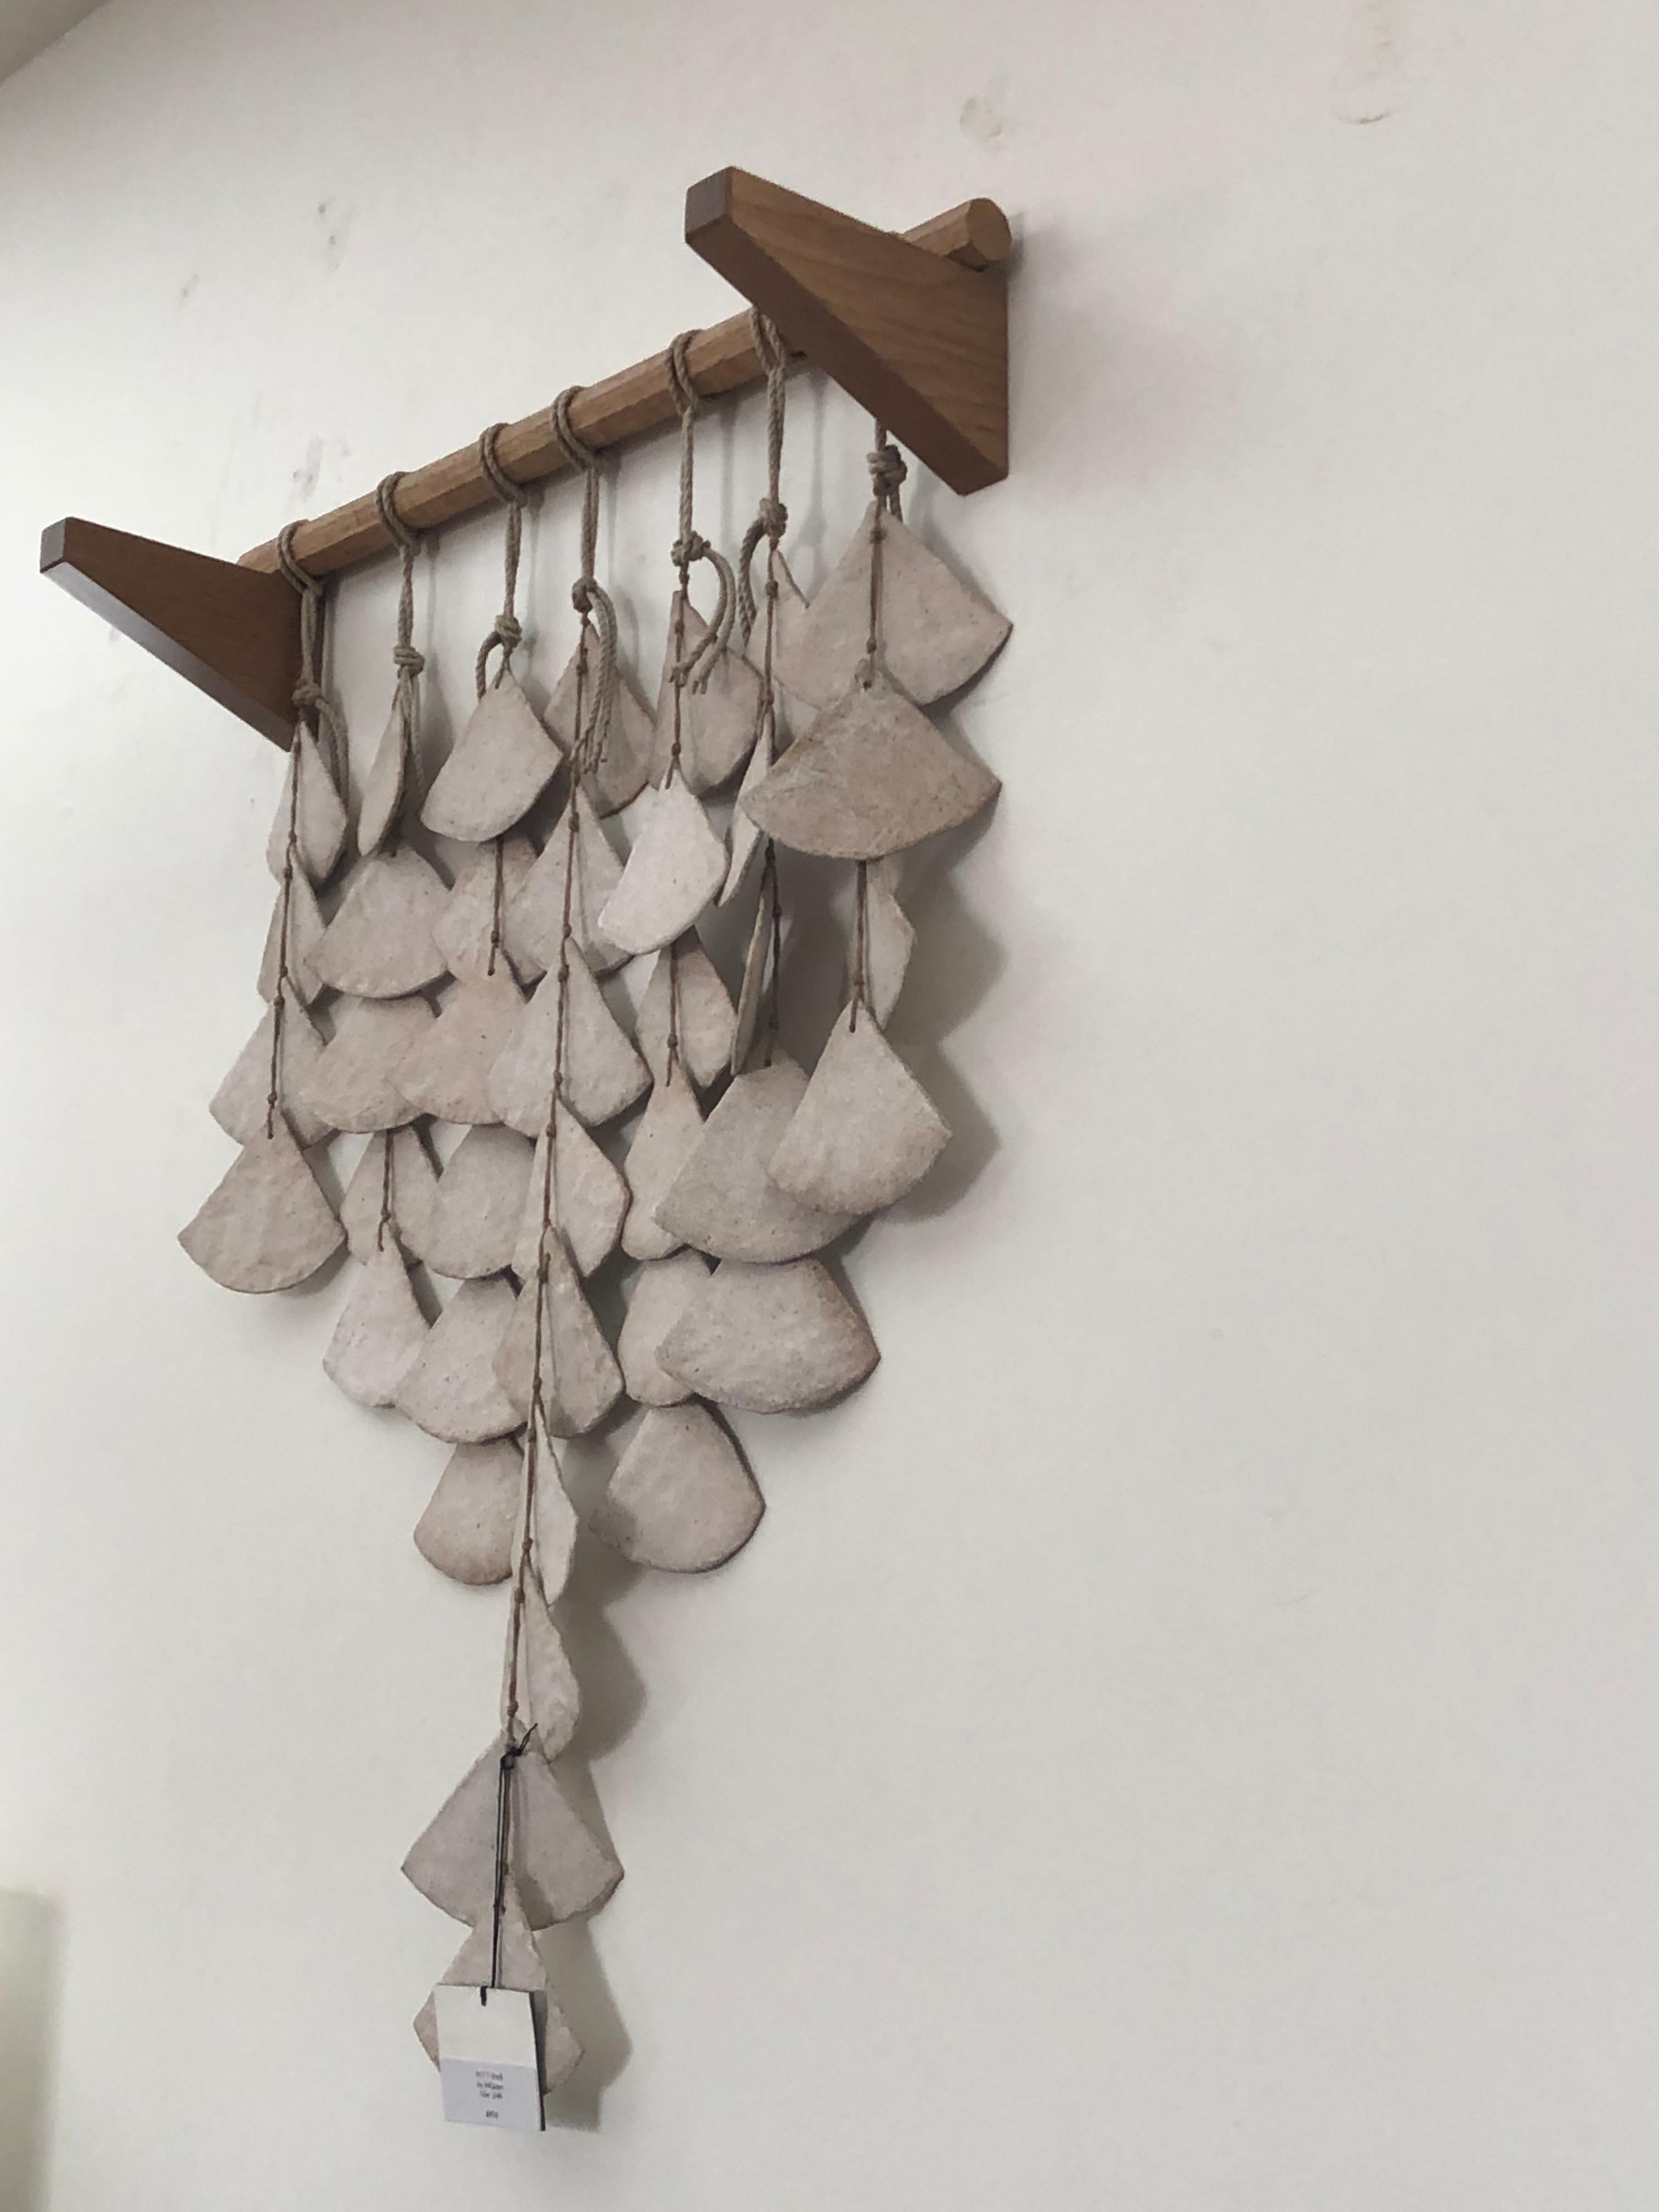 PLT 7 shell by MQuan 

Includes ceramic wall hanging, wooden dowel, and two wedge wall hooks